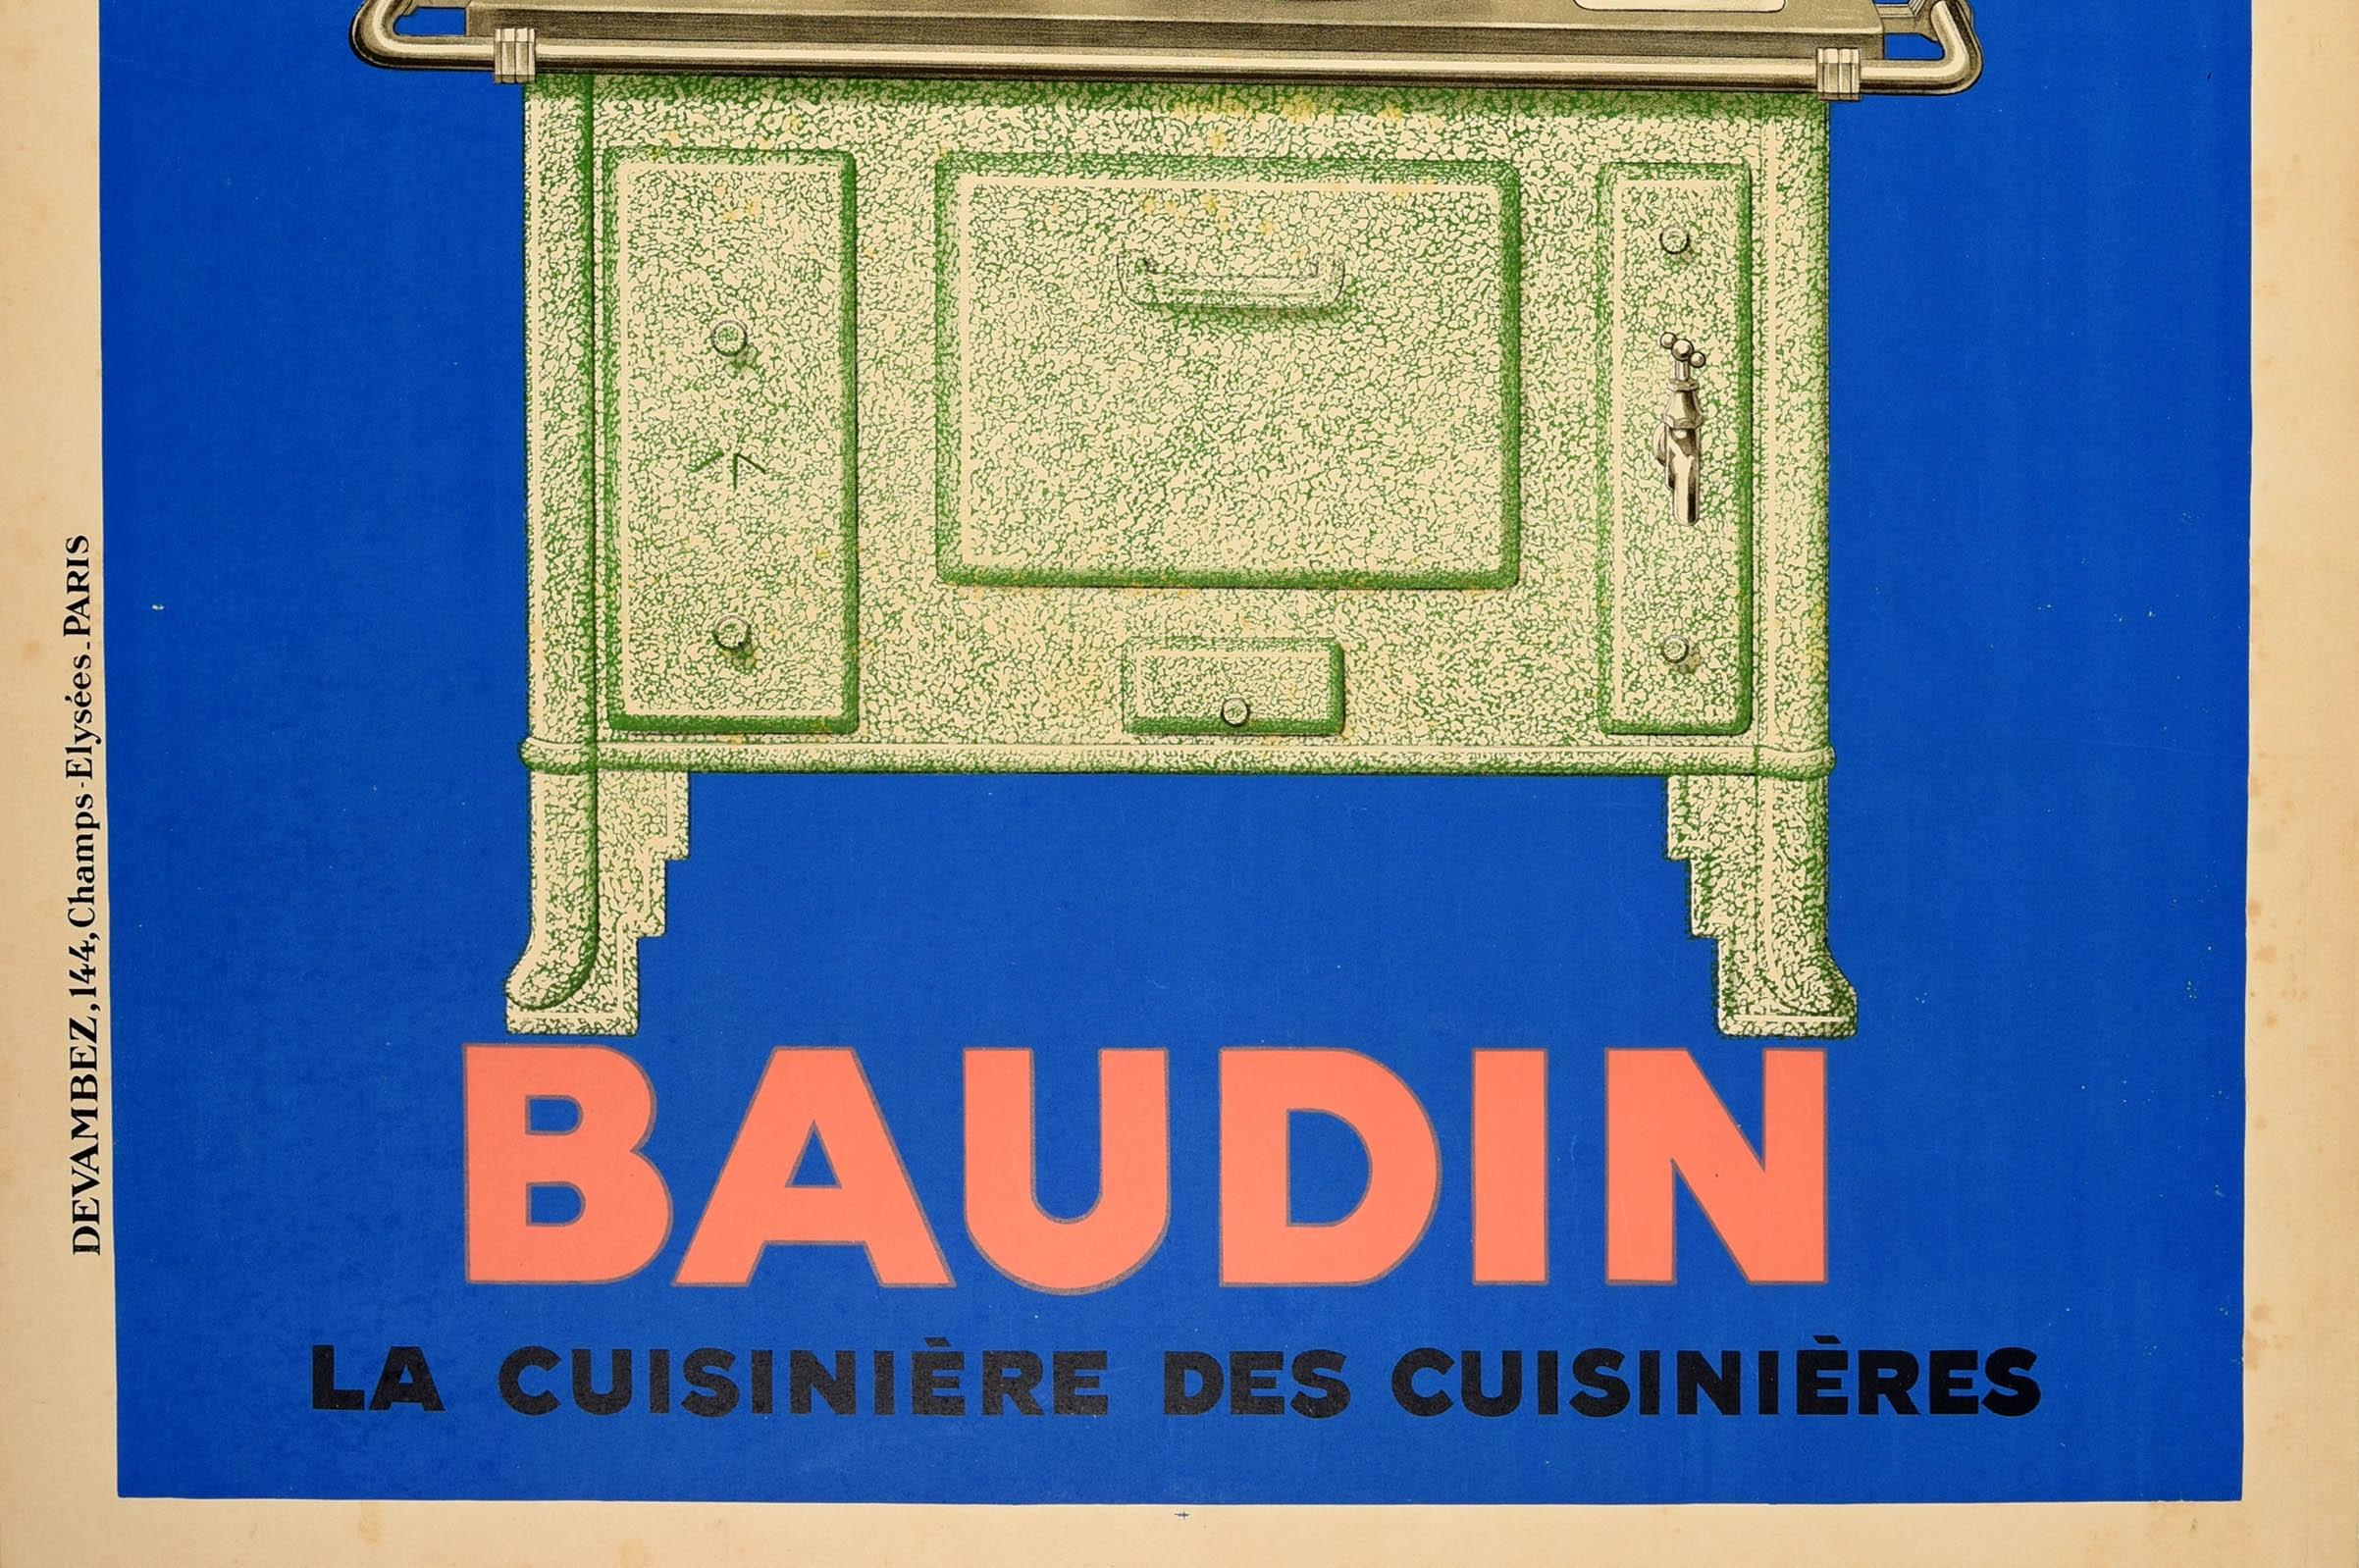 Original Vintage Advertising Poster Baudin Cuisiniere Cooking Leonetto Cappiello For Sale 2